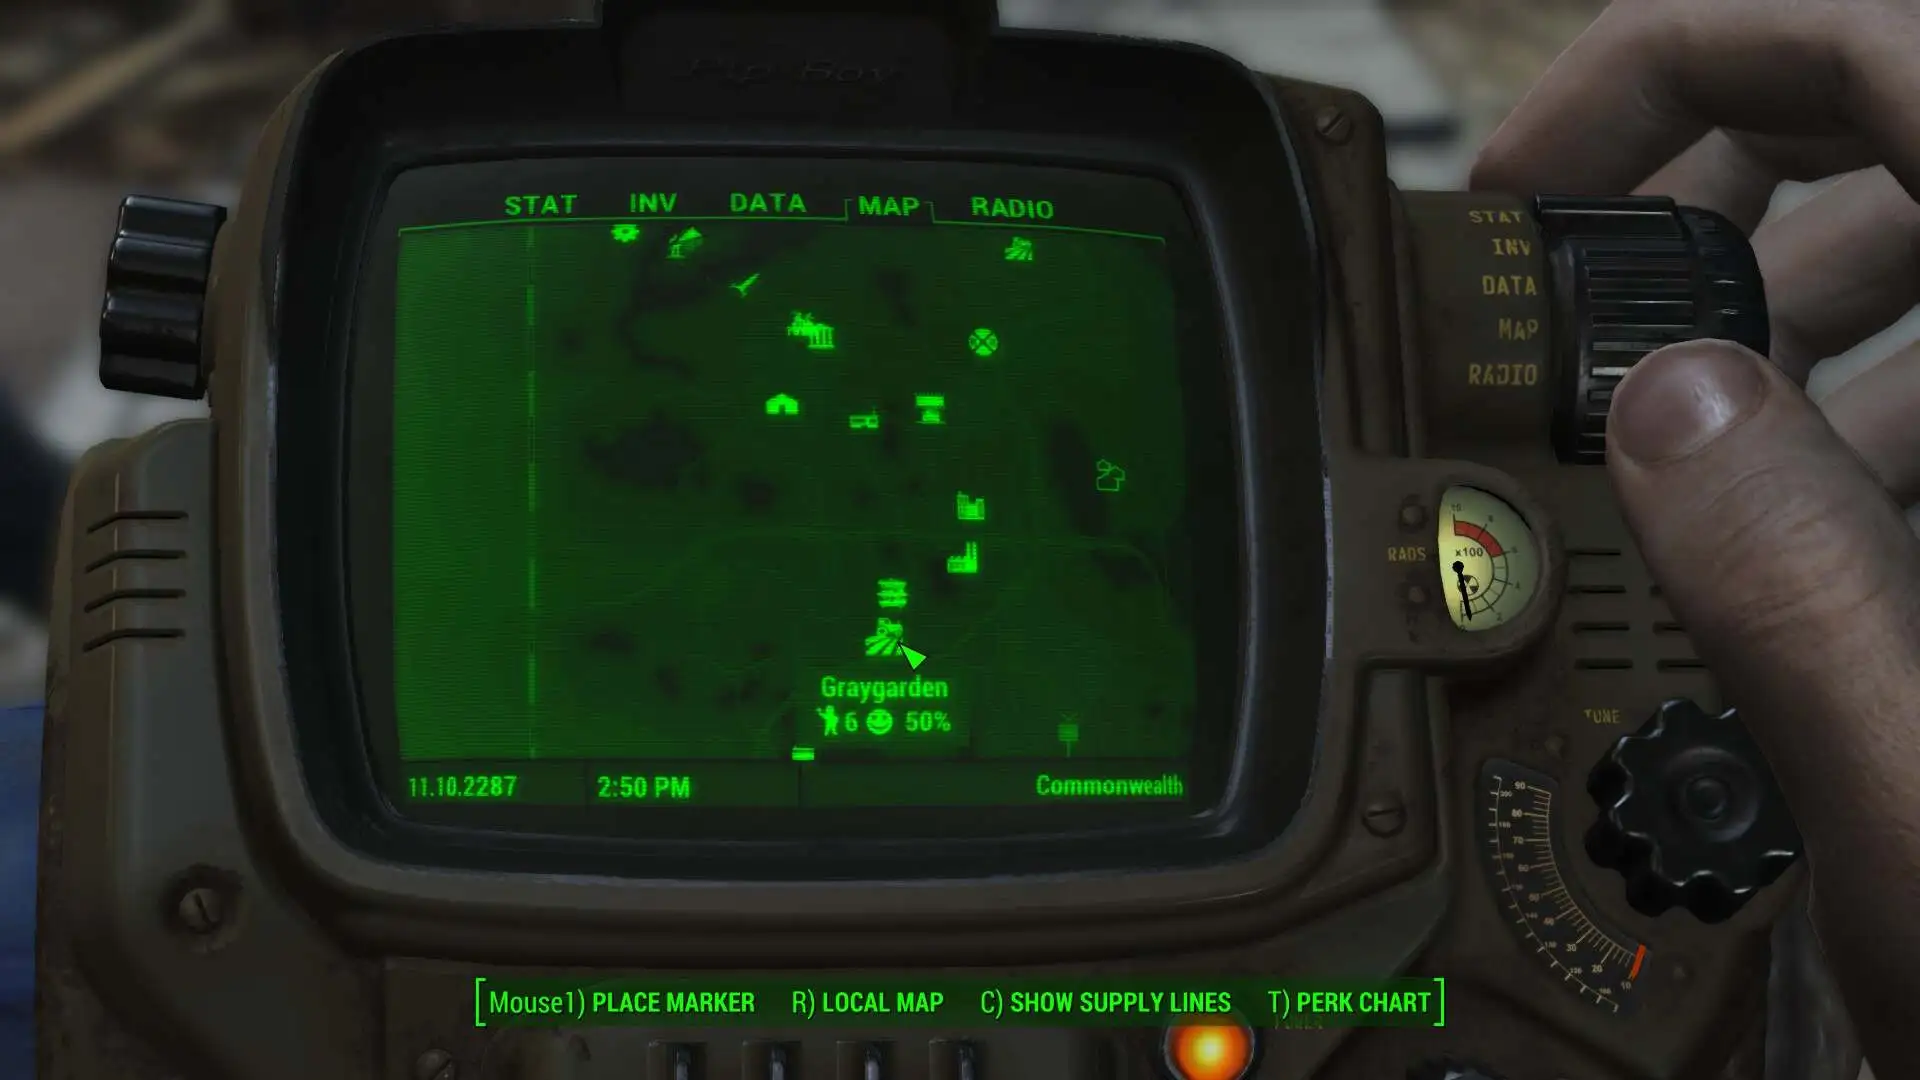 How to easily farm Adhesive in Fallout 4